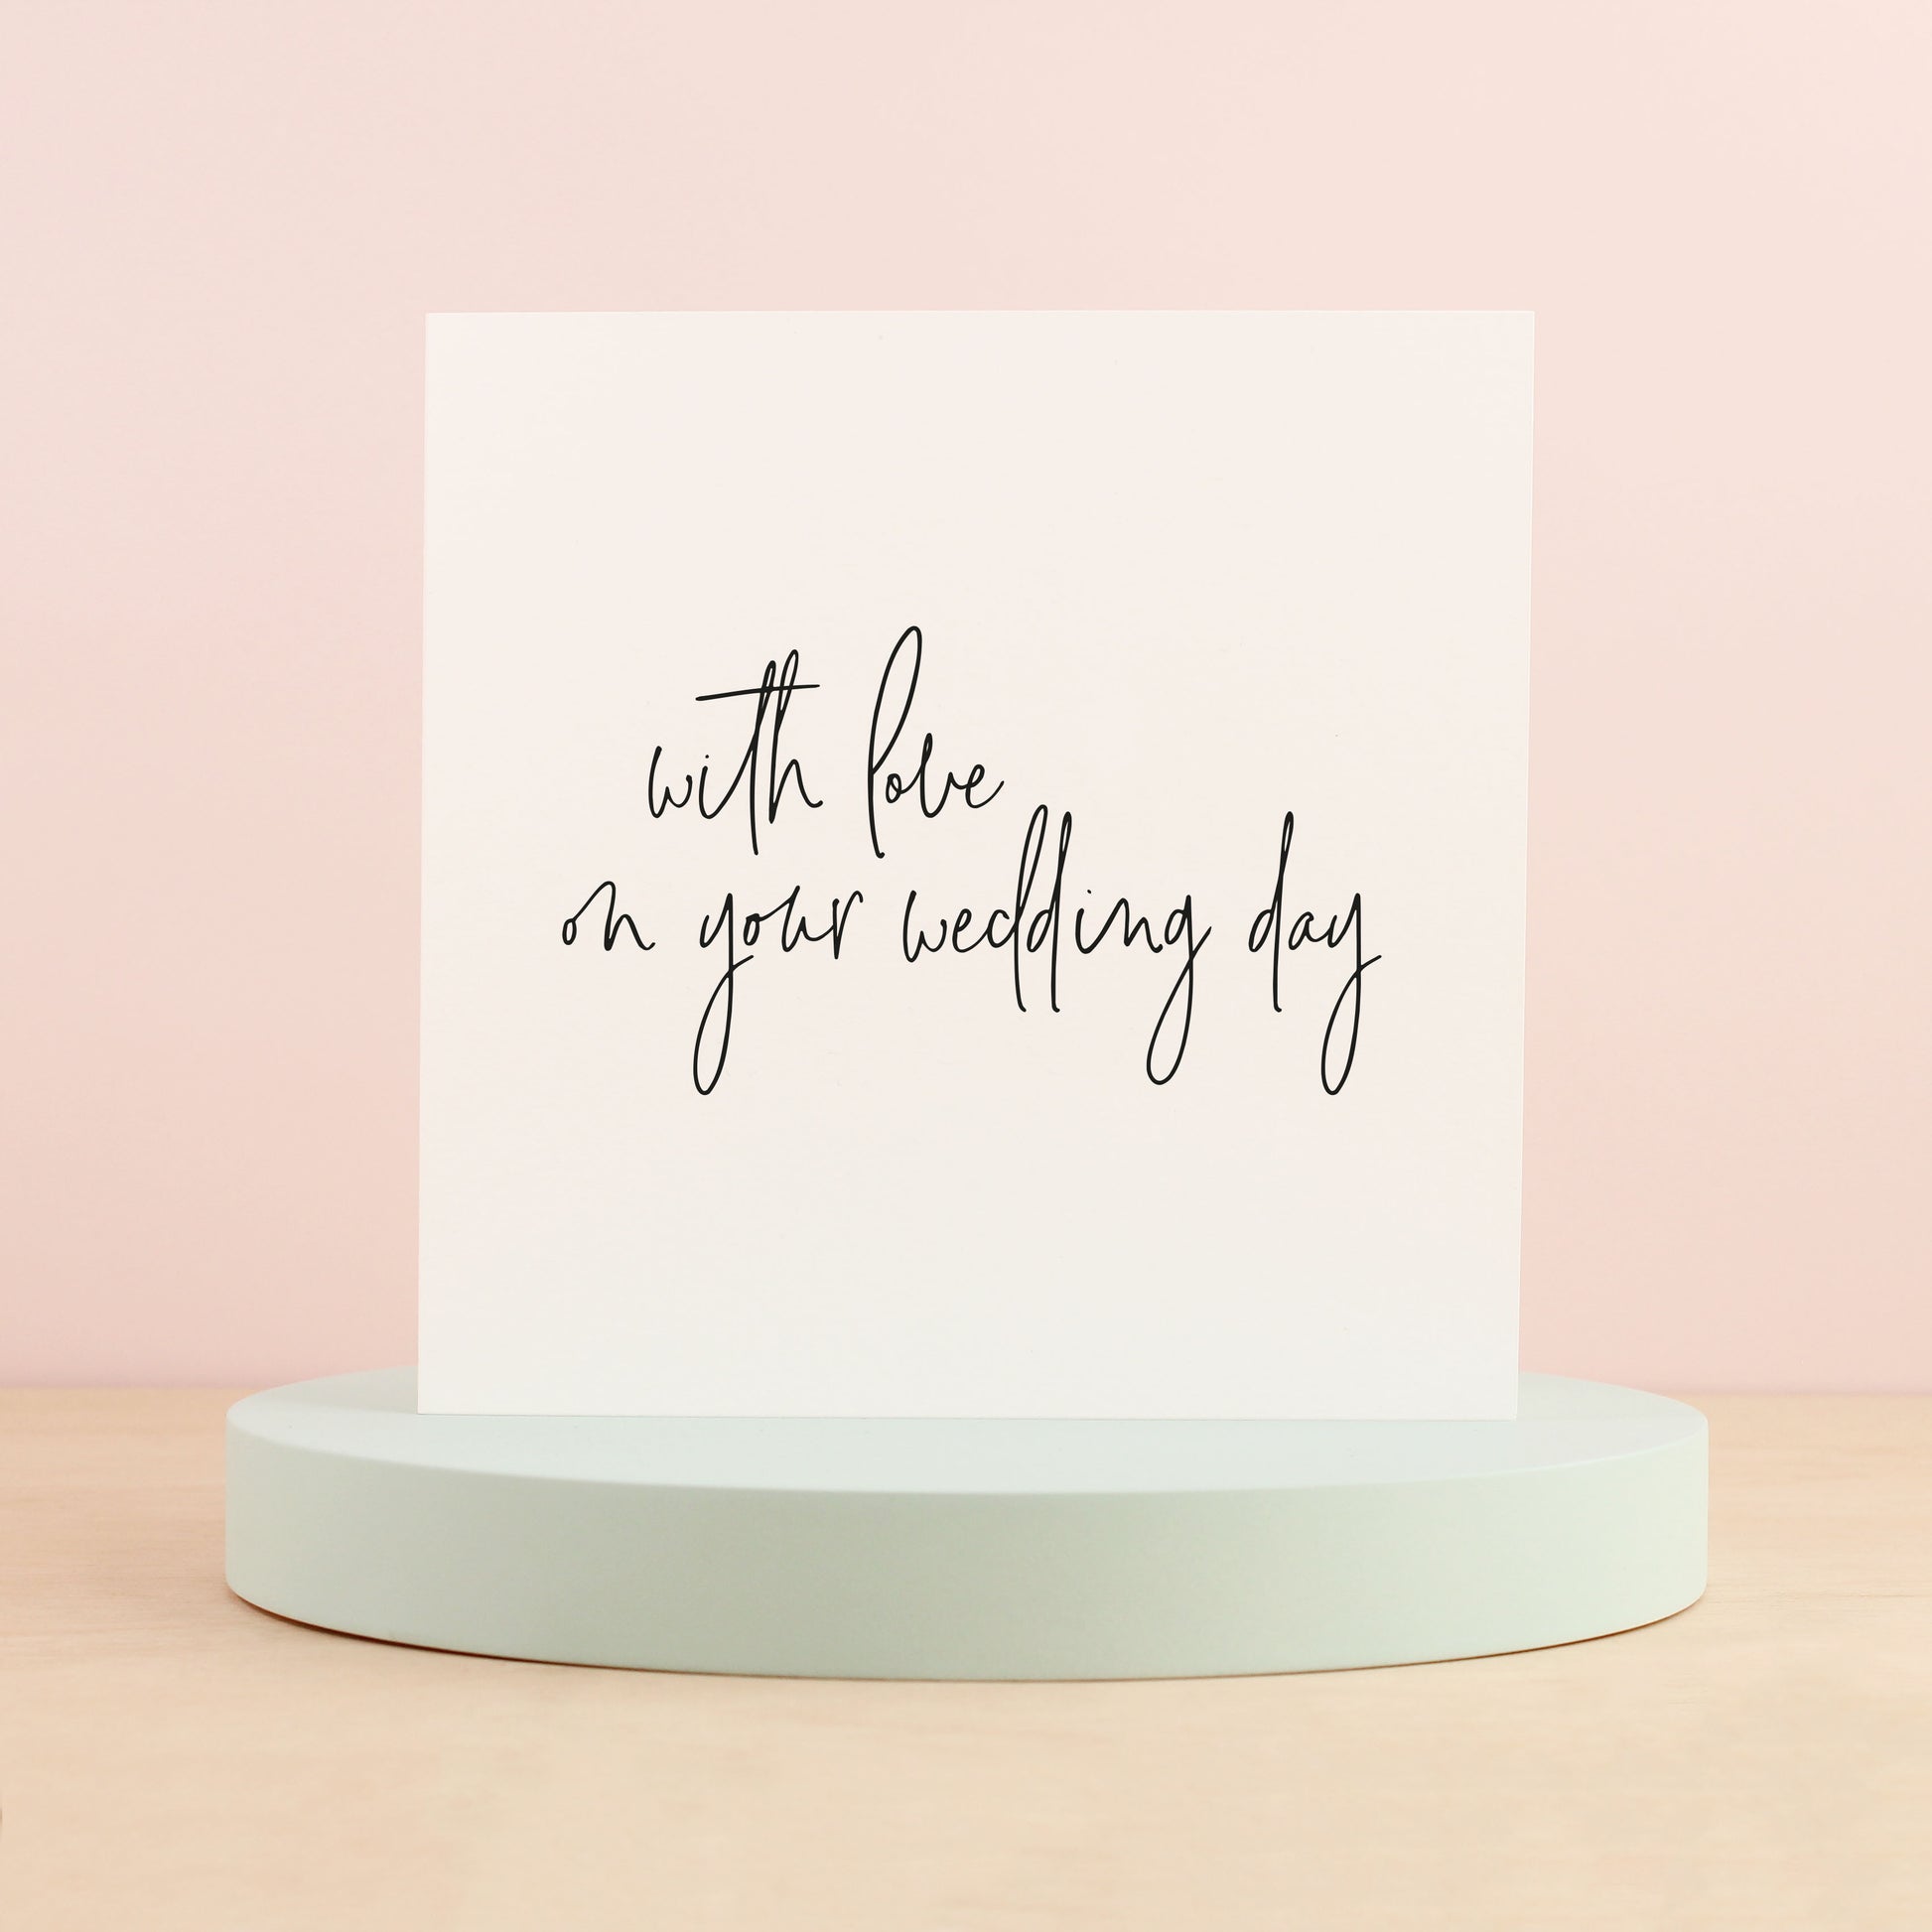 With love on your wedding day card from Purple Tree Designs